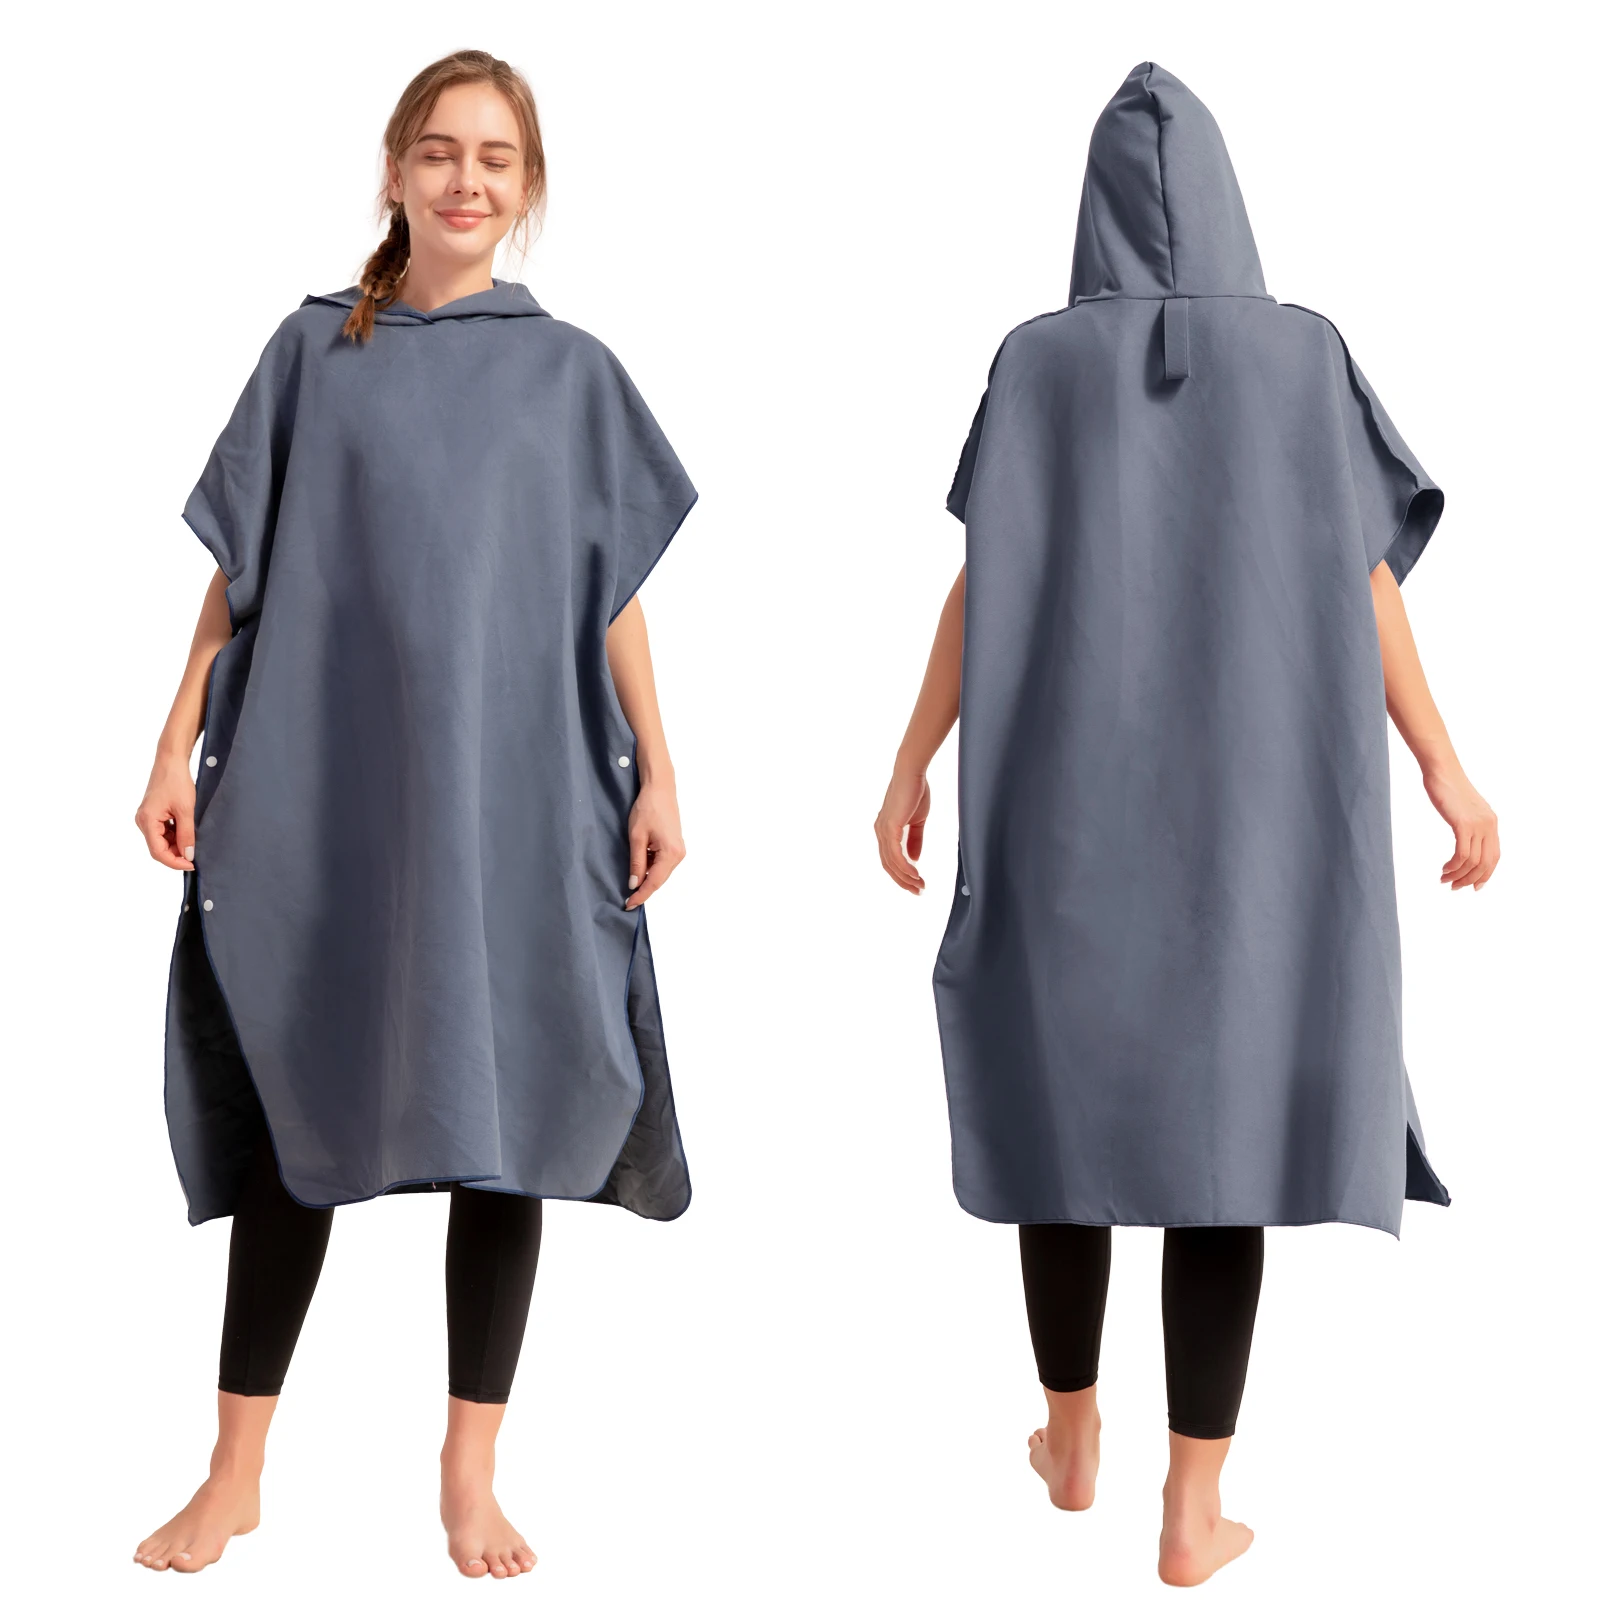 Microfiber Poncho Towel Surf Beach Wetsuit Changing Bath Robe with Hood Watersports Activities Adults Men Women